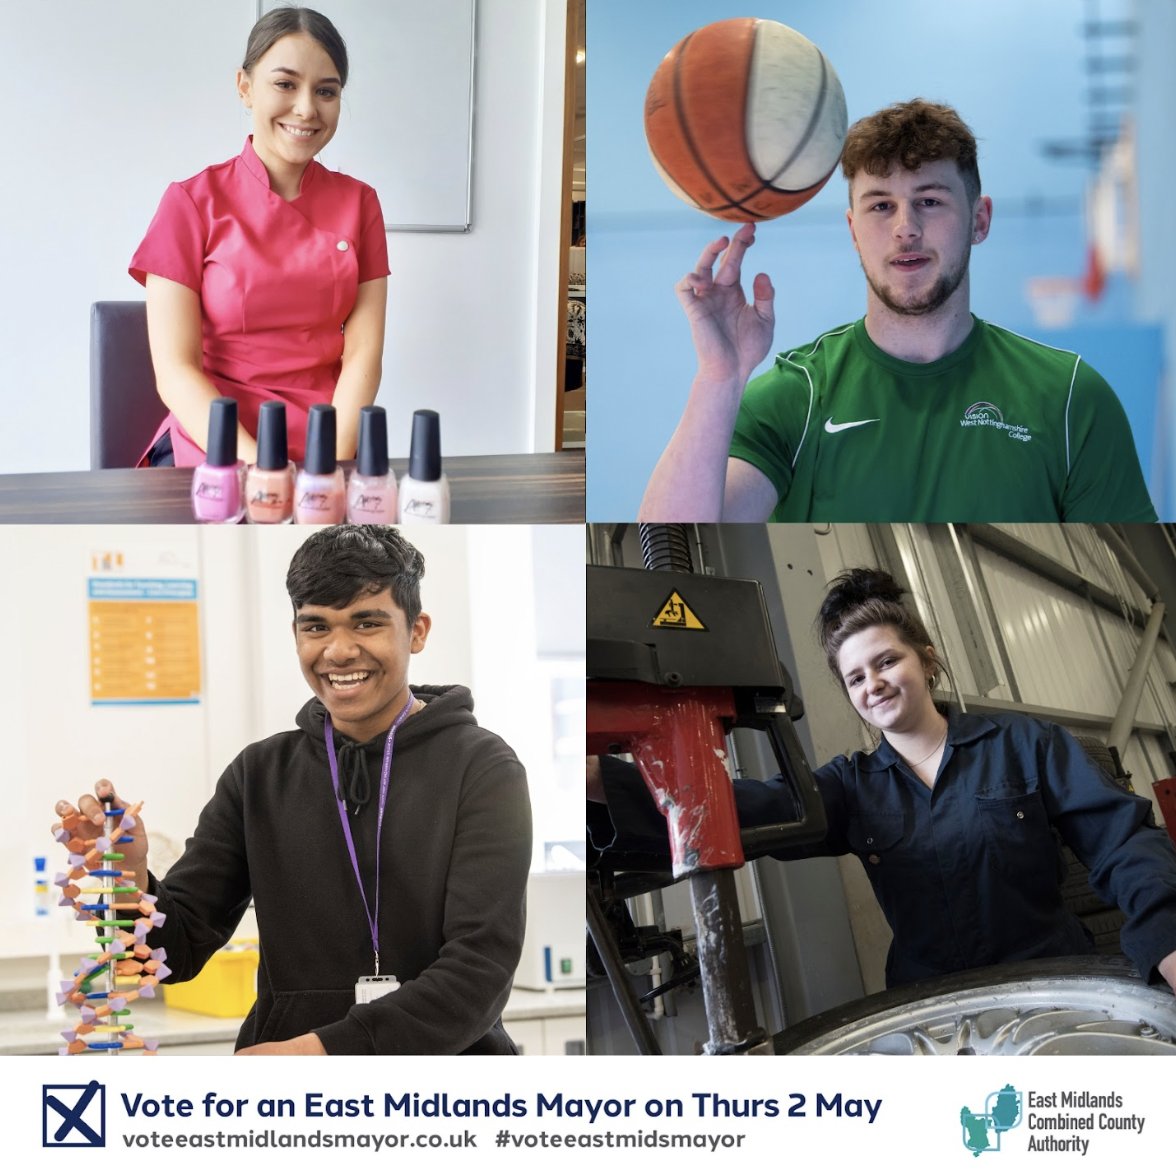 Today, many of our students are voting for the first time. This election will impact transport, skills, housing, and net-zero projects. We're providing a toolkit from EMCCA to guide you.📥 Find out more here 👉voteeastmidlandsmayor.co.uk #VoteEastMidsMayor